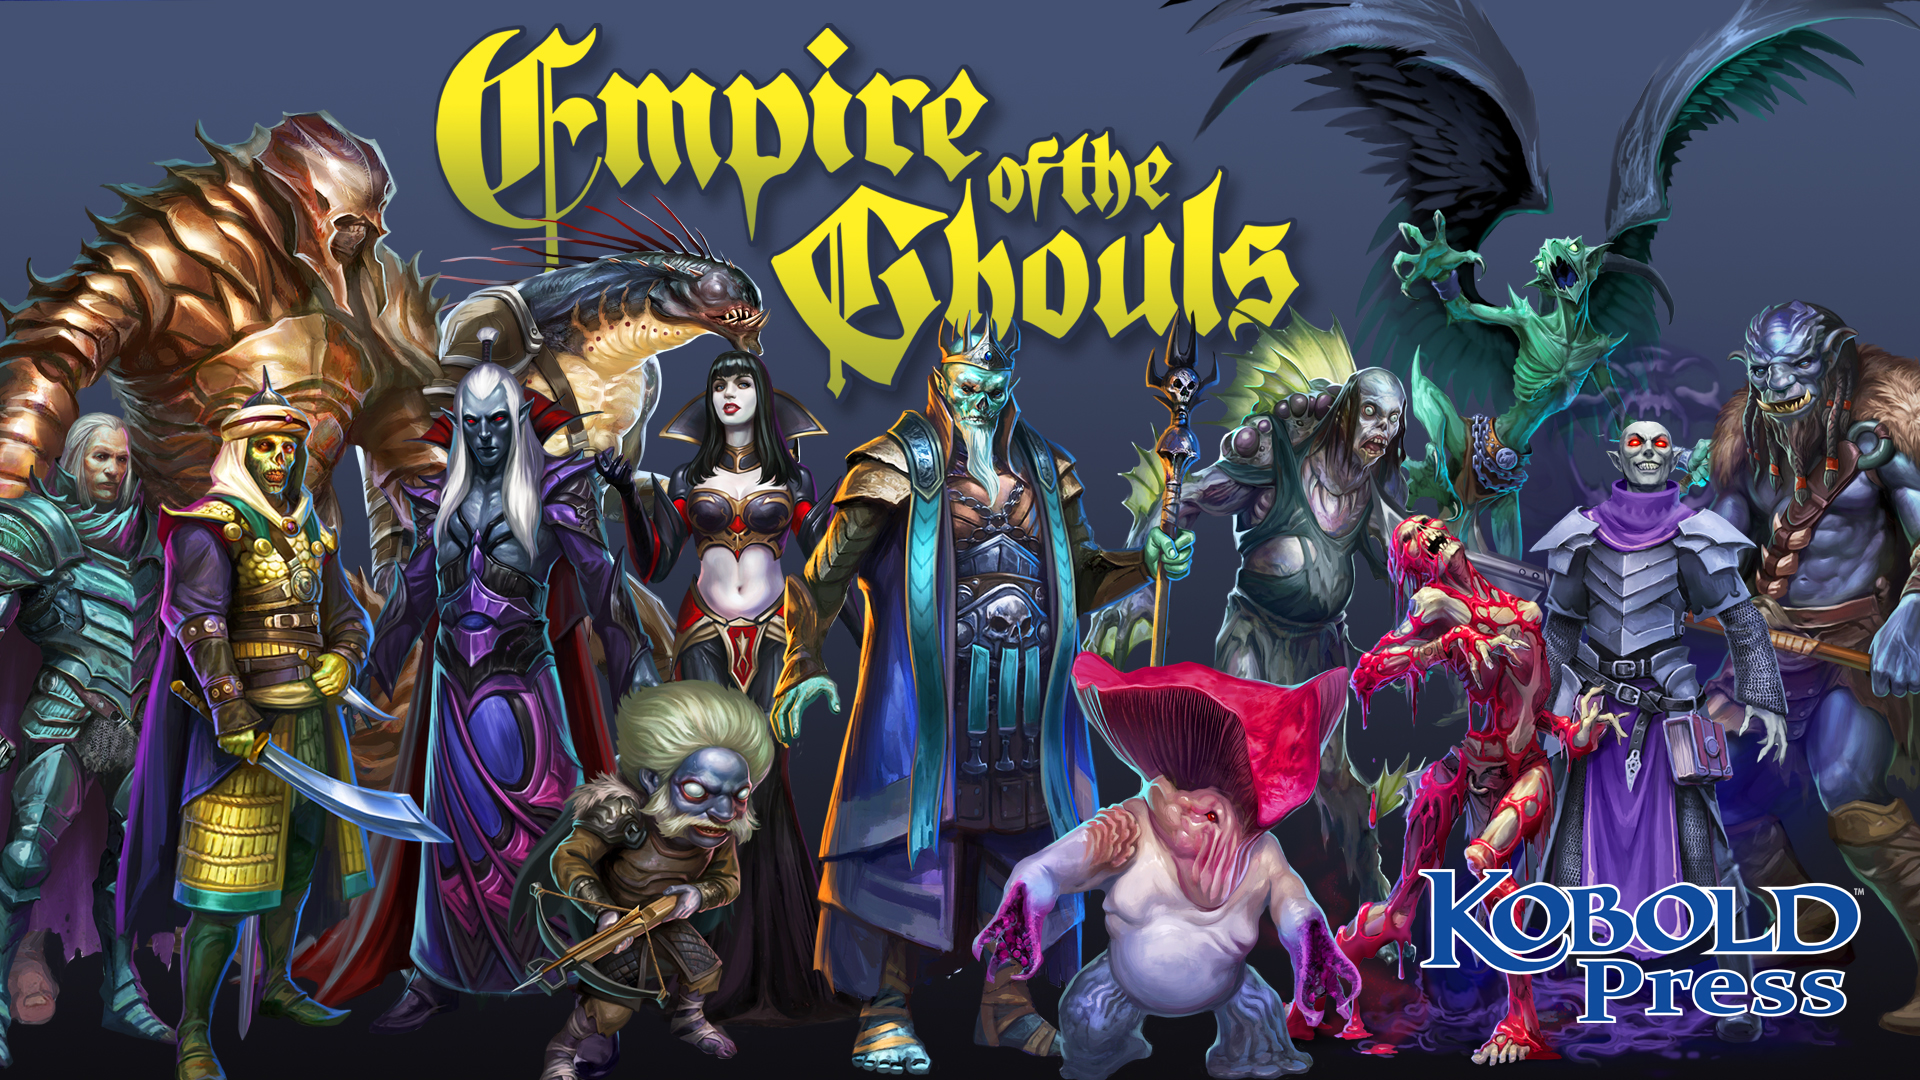 Campaign Against the Undead Empire of Ghouls – Nerdarchy